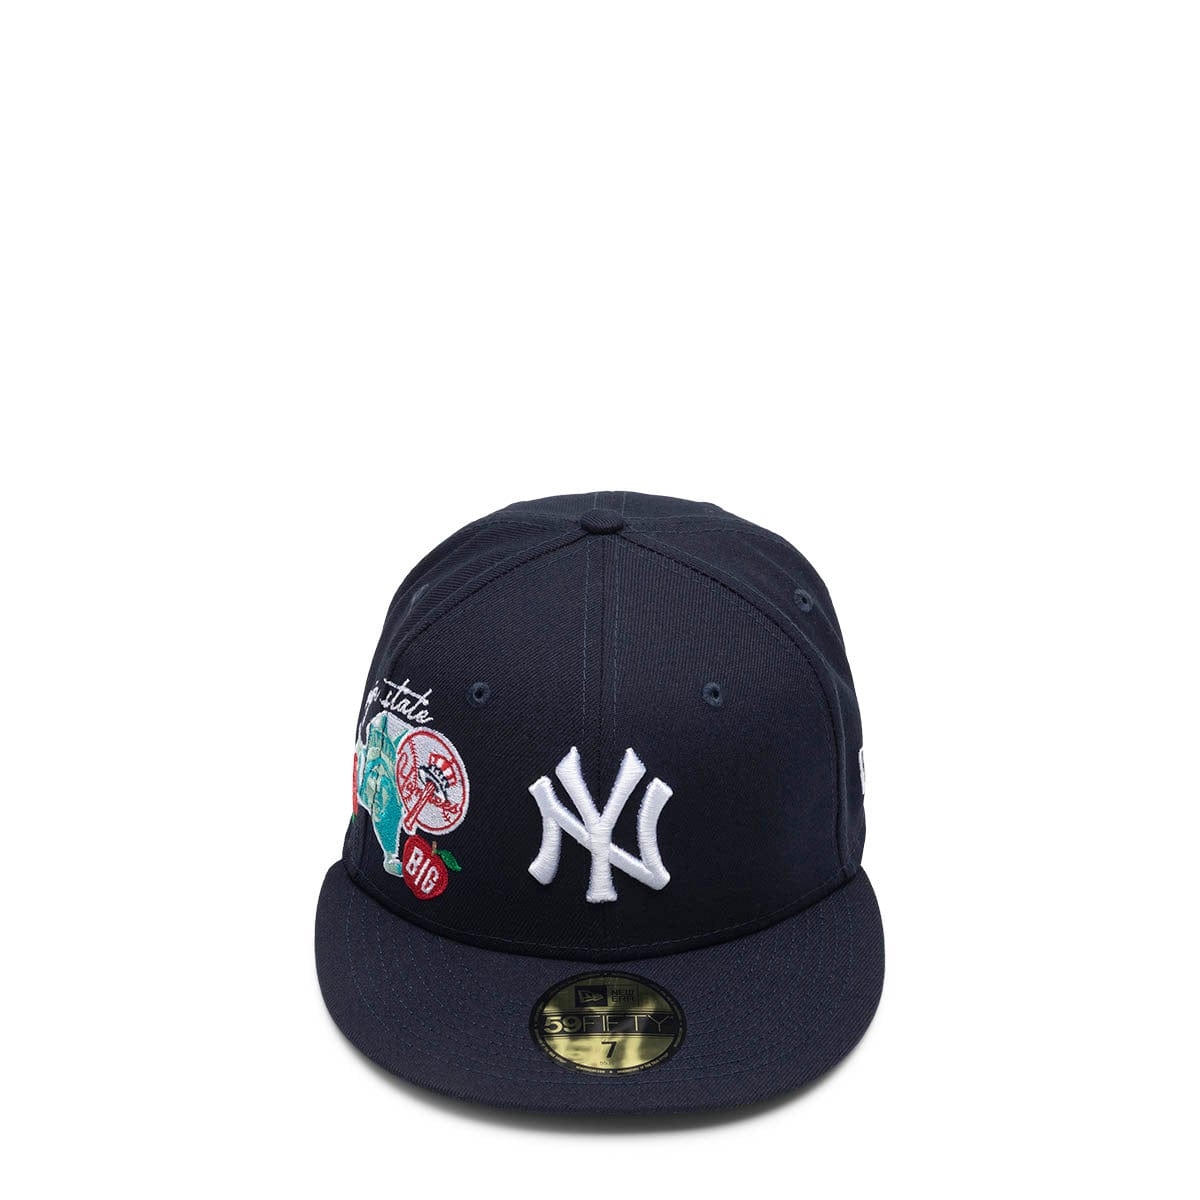 New Era 59FIFTY NEW YORK YANKEES CITY CLUSTERS FITTED CAP NAVY